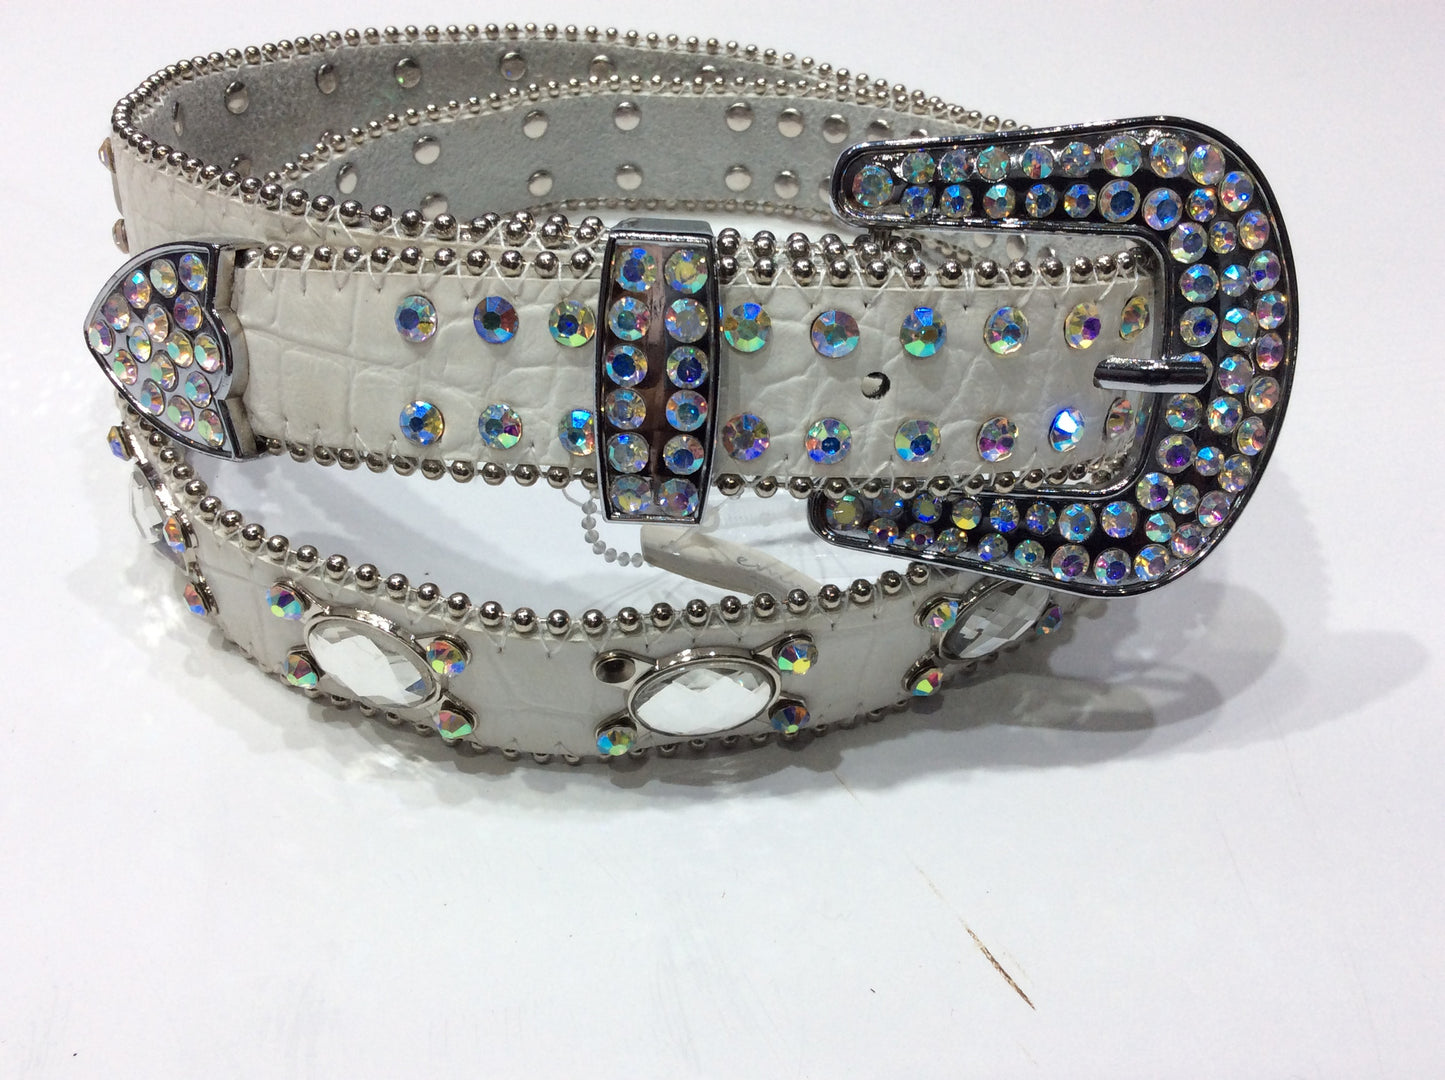 Belts-Medium Width White Leather Belt with Beautiful Crystal and Silver Bead Embellishment